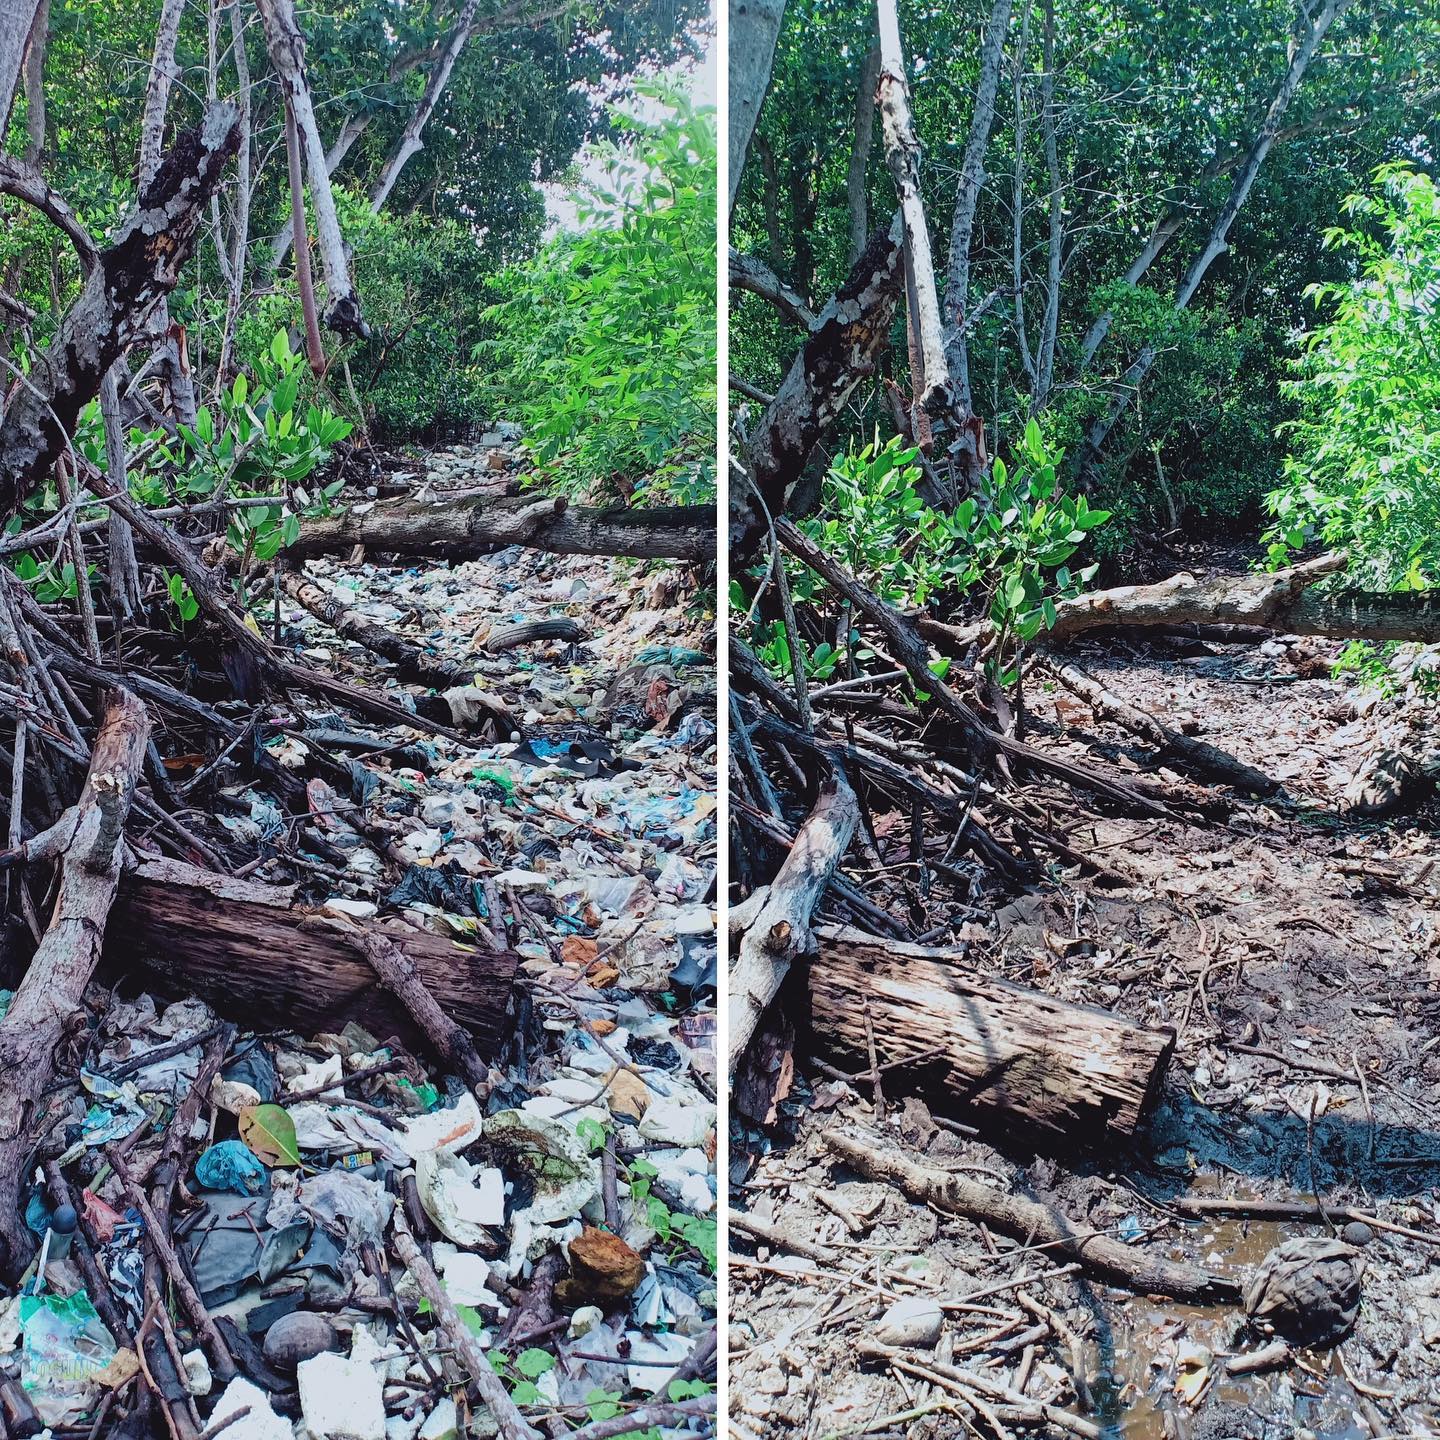 Sungai Watch organise emergency cleanups at illegal dumps and along riverbanks to prevent plastic from entering rivers as well as work on enforcing proper waste management at the local level.